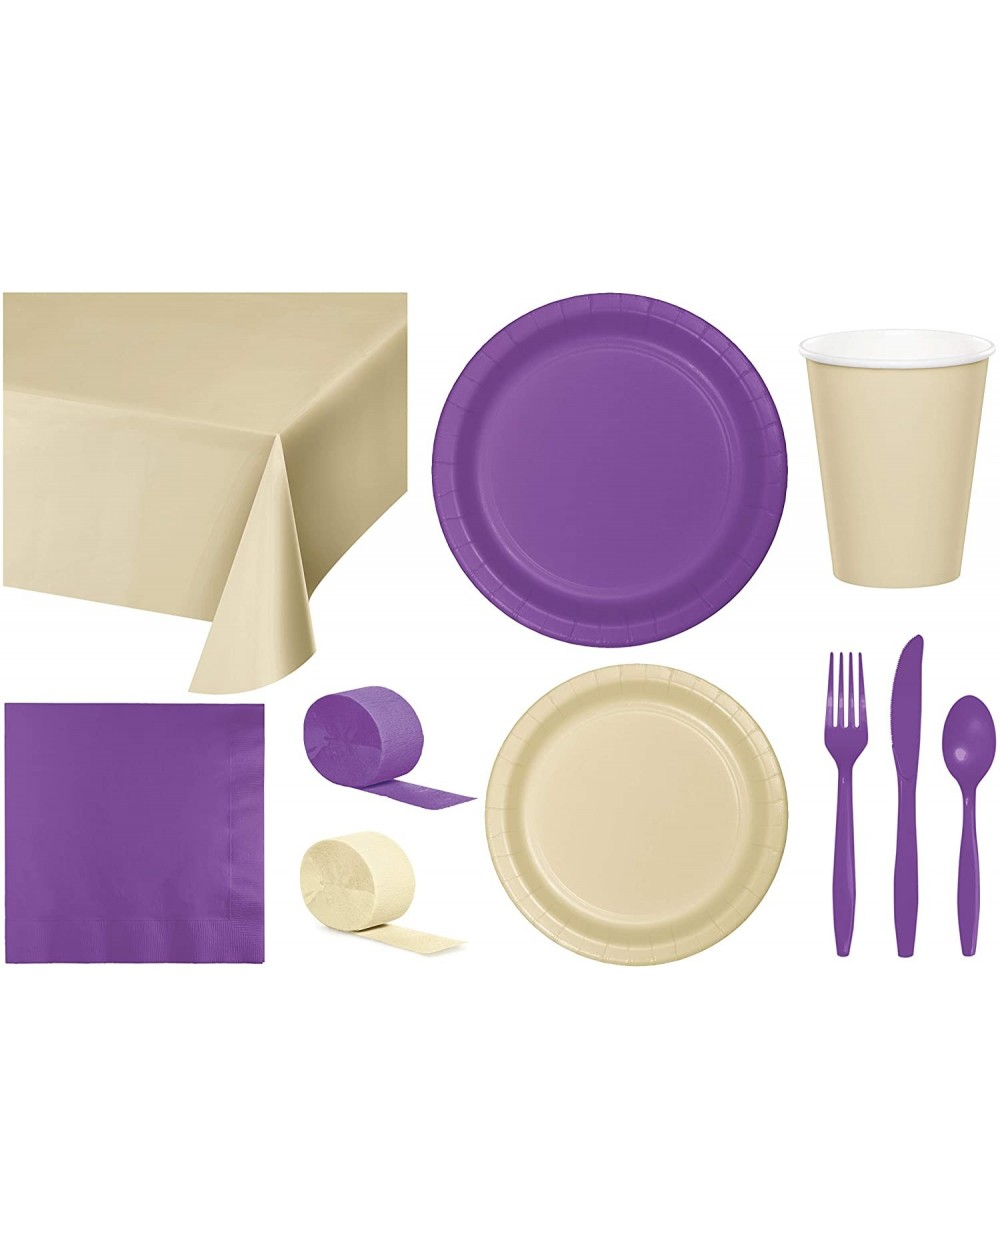 Party Packs Party Bundle Bulk- Tableware for 24 People Ivory and Amethyst- 2 Size Plates Napkins- Paper Cups Tablecovers and ...